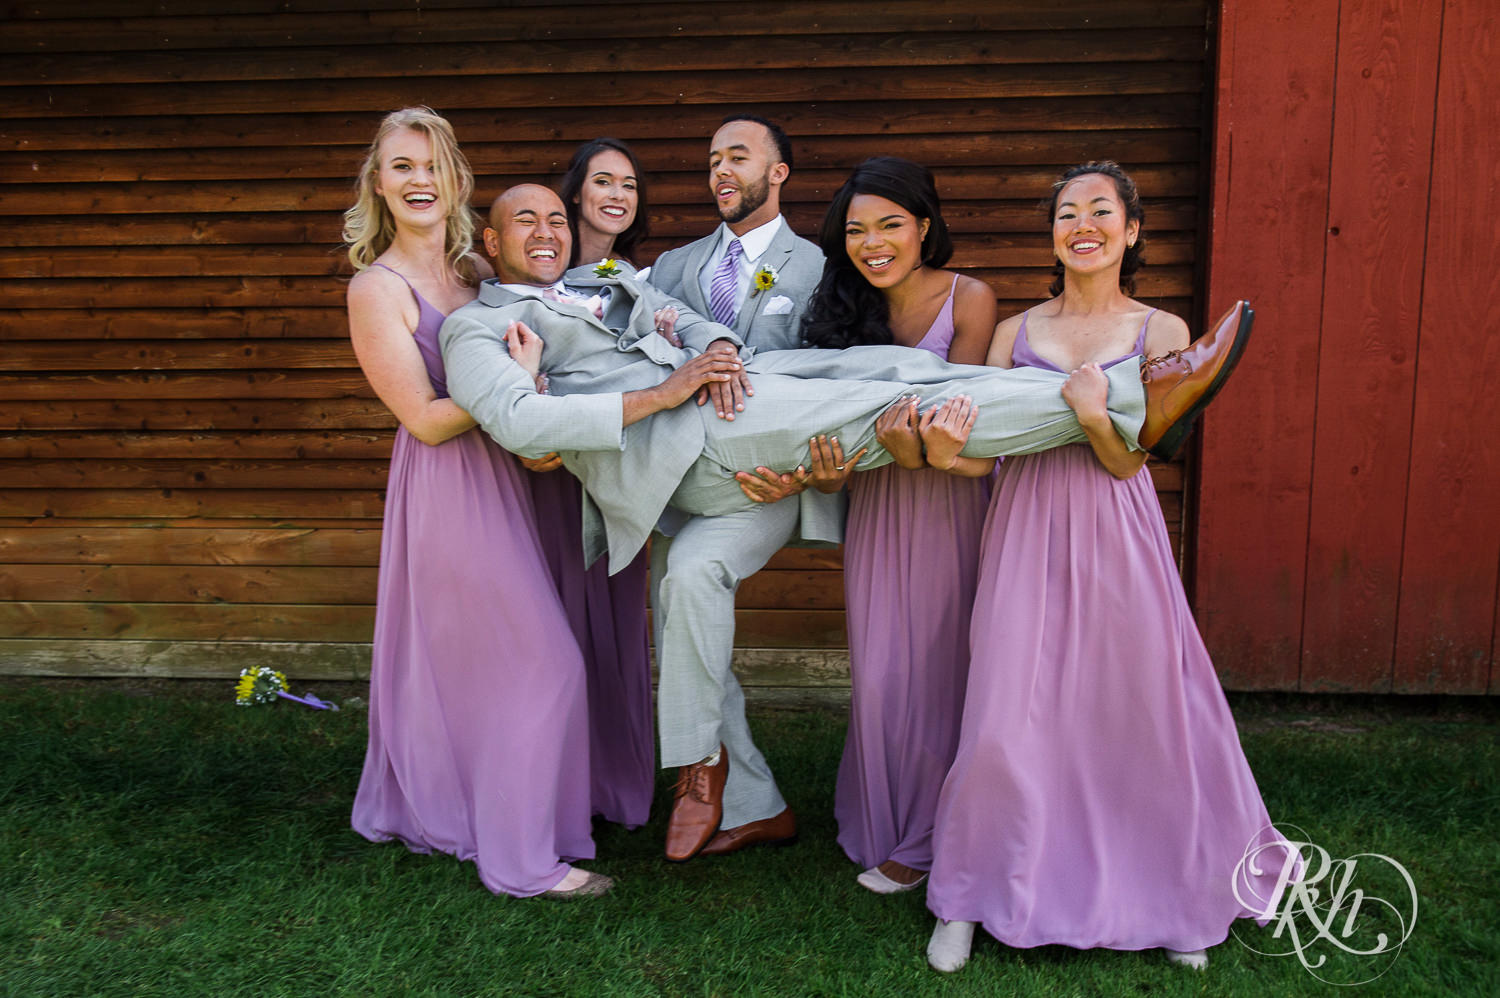 Wedding party smiles holding groom during barn wedding at Birch Hill Barn in Glenwood City, Wisconsin.